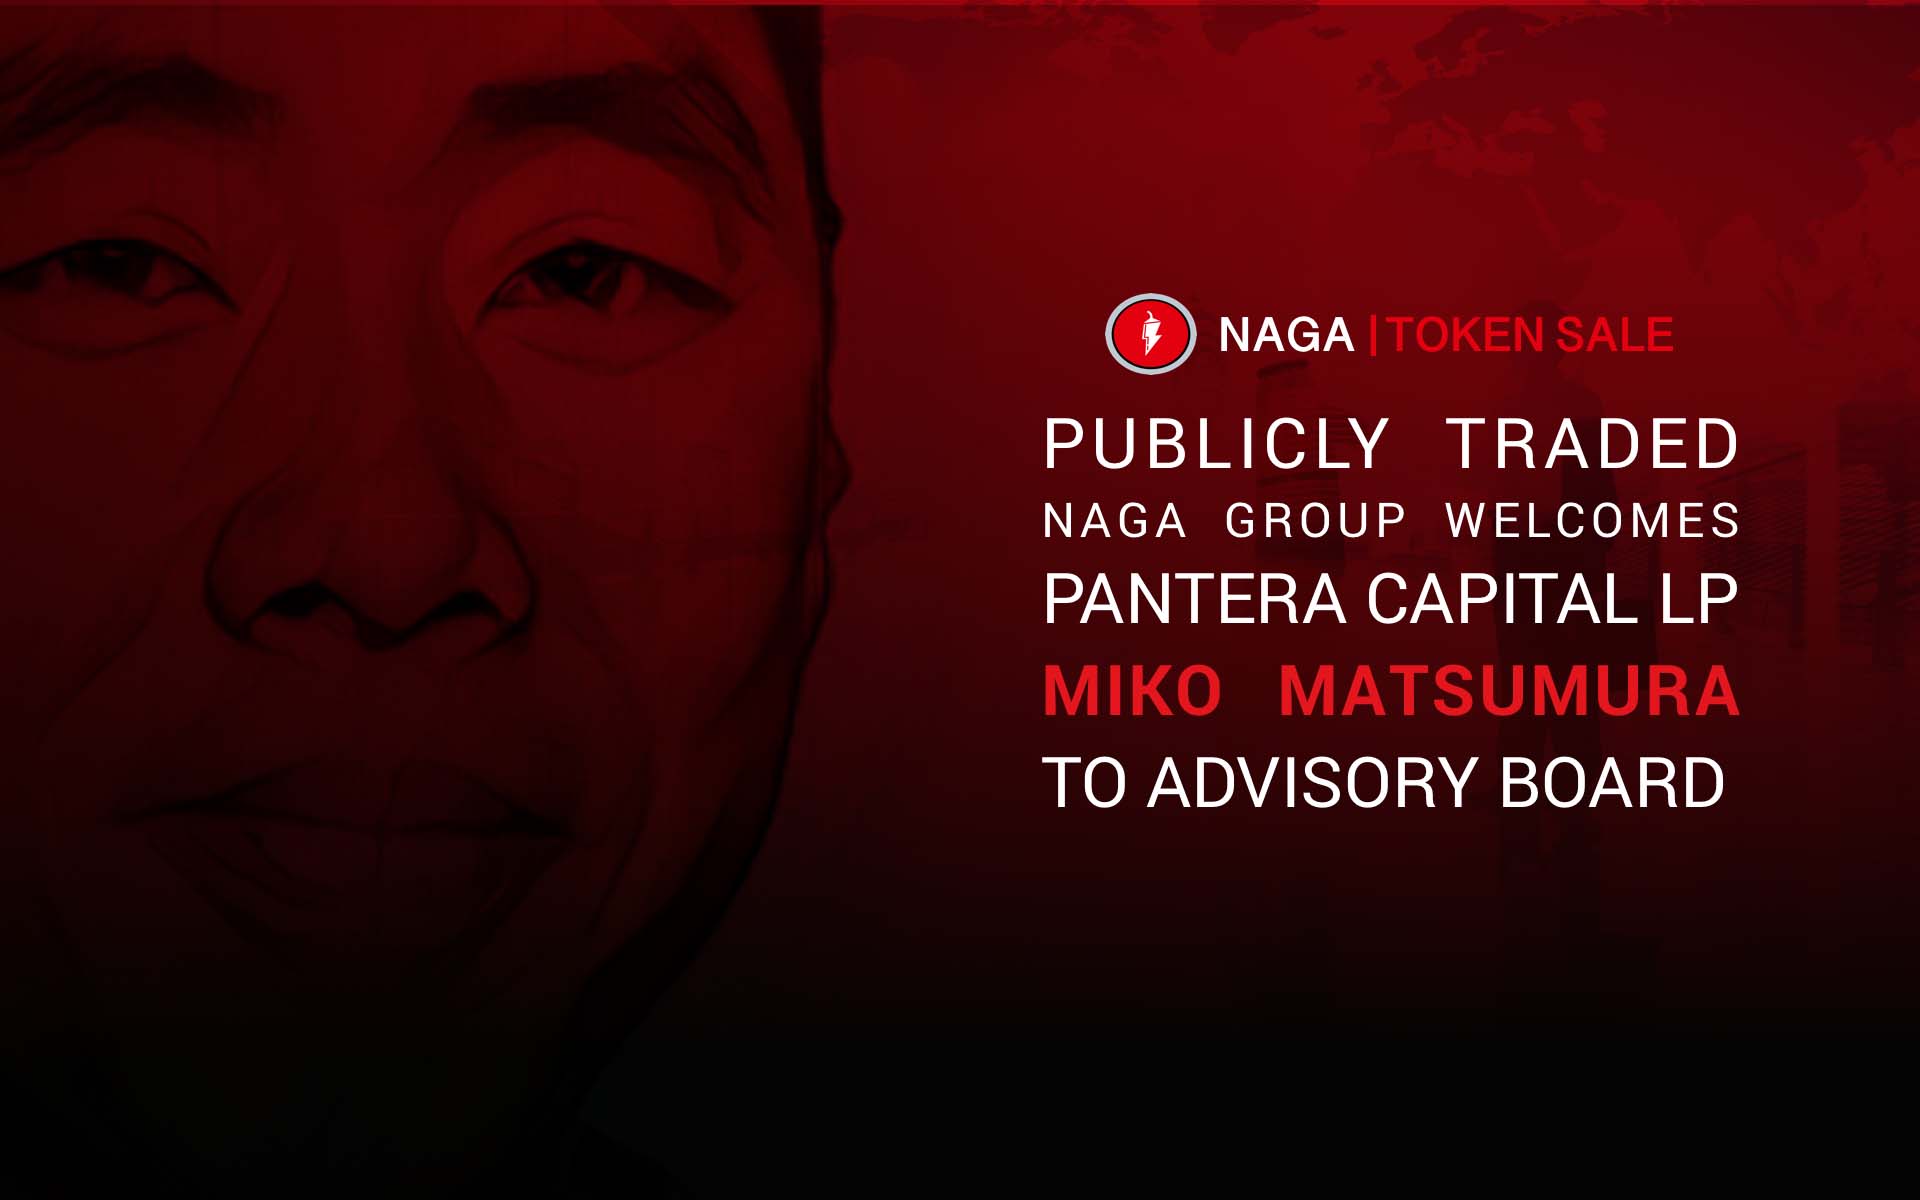 Publicly Traded NAGA Group Welcomes Miko Matsumura to ICO Advisory Board